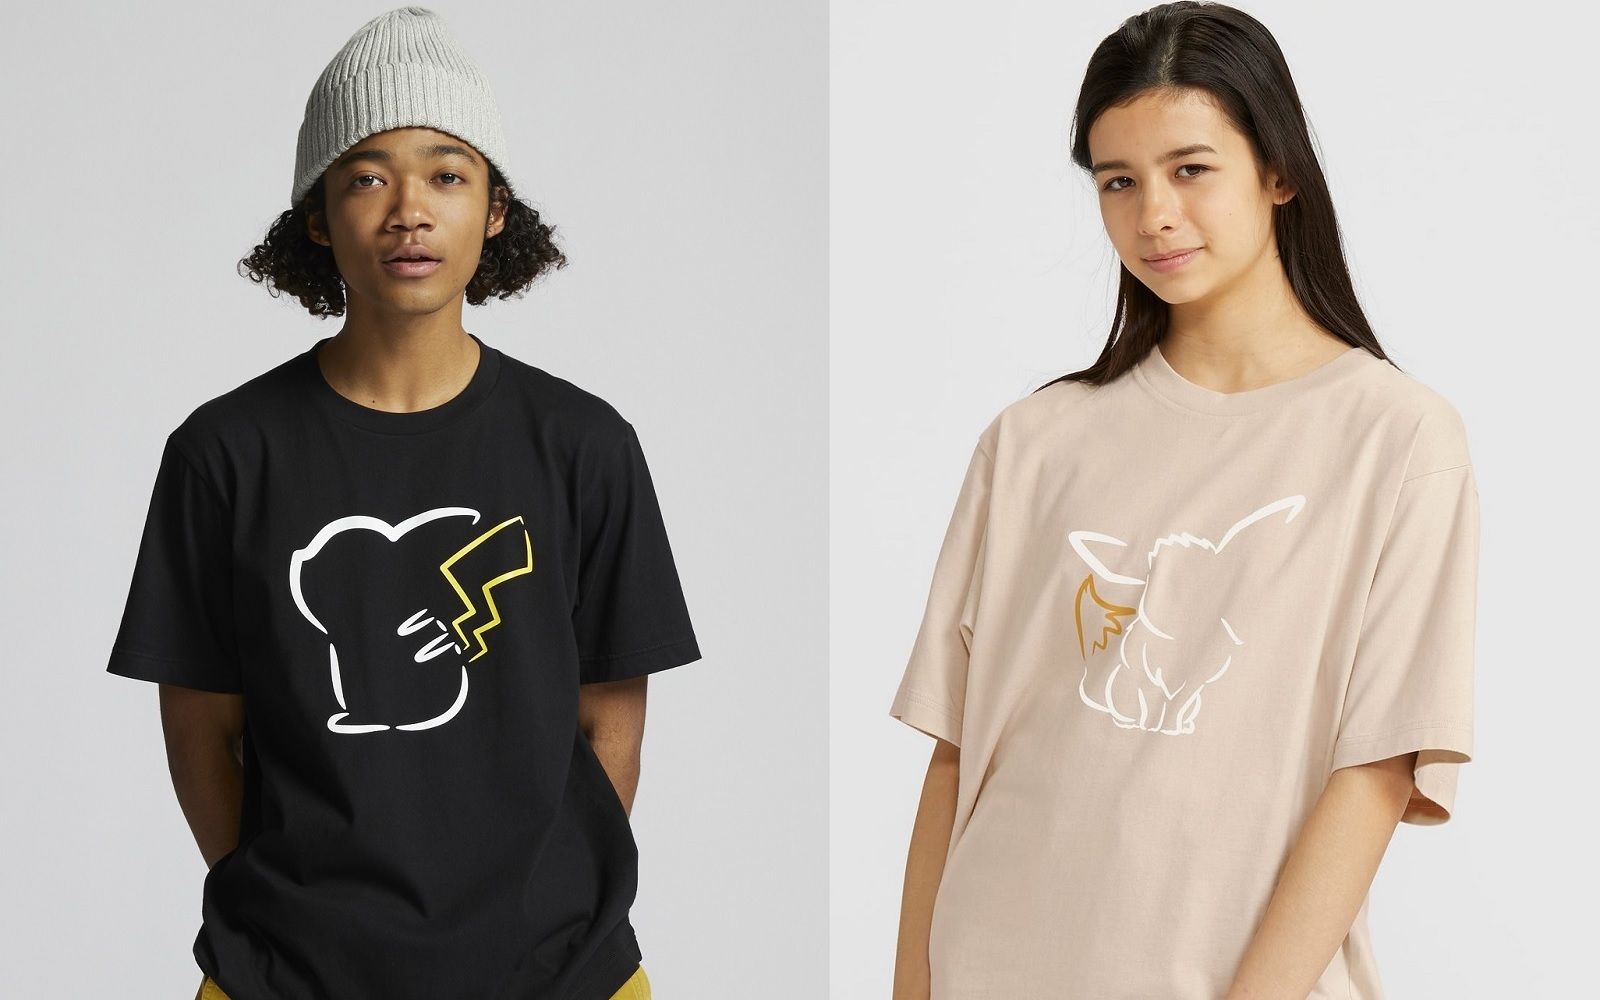 Is Chanel's Formula 1 T-shirt the new fashion obsession?